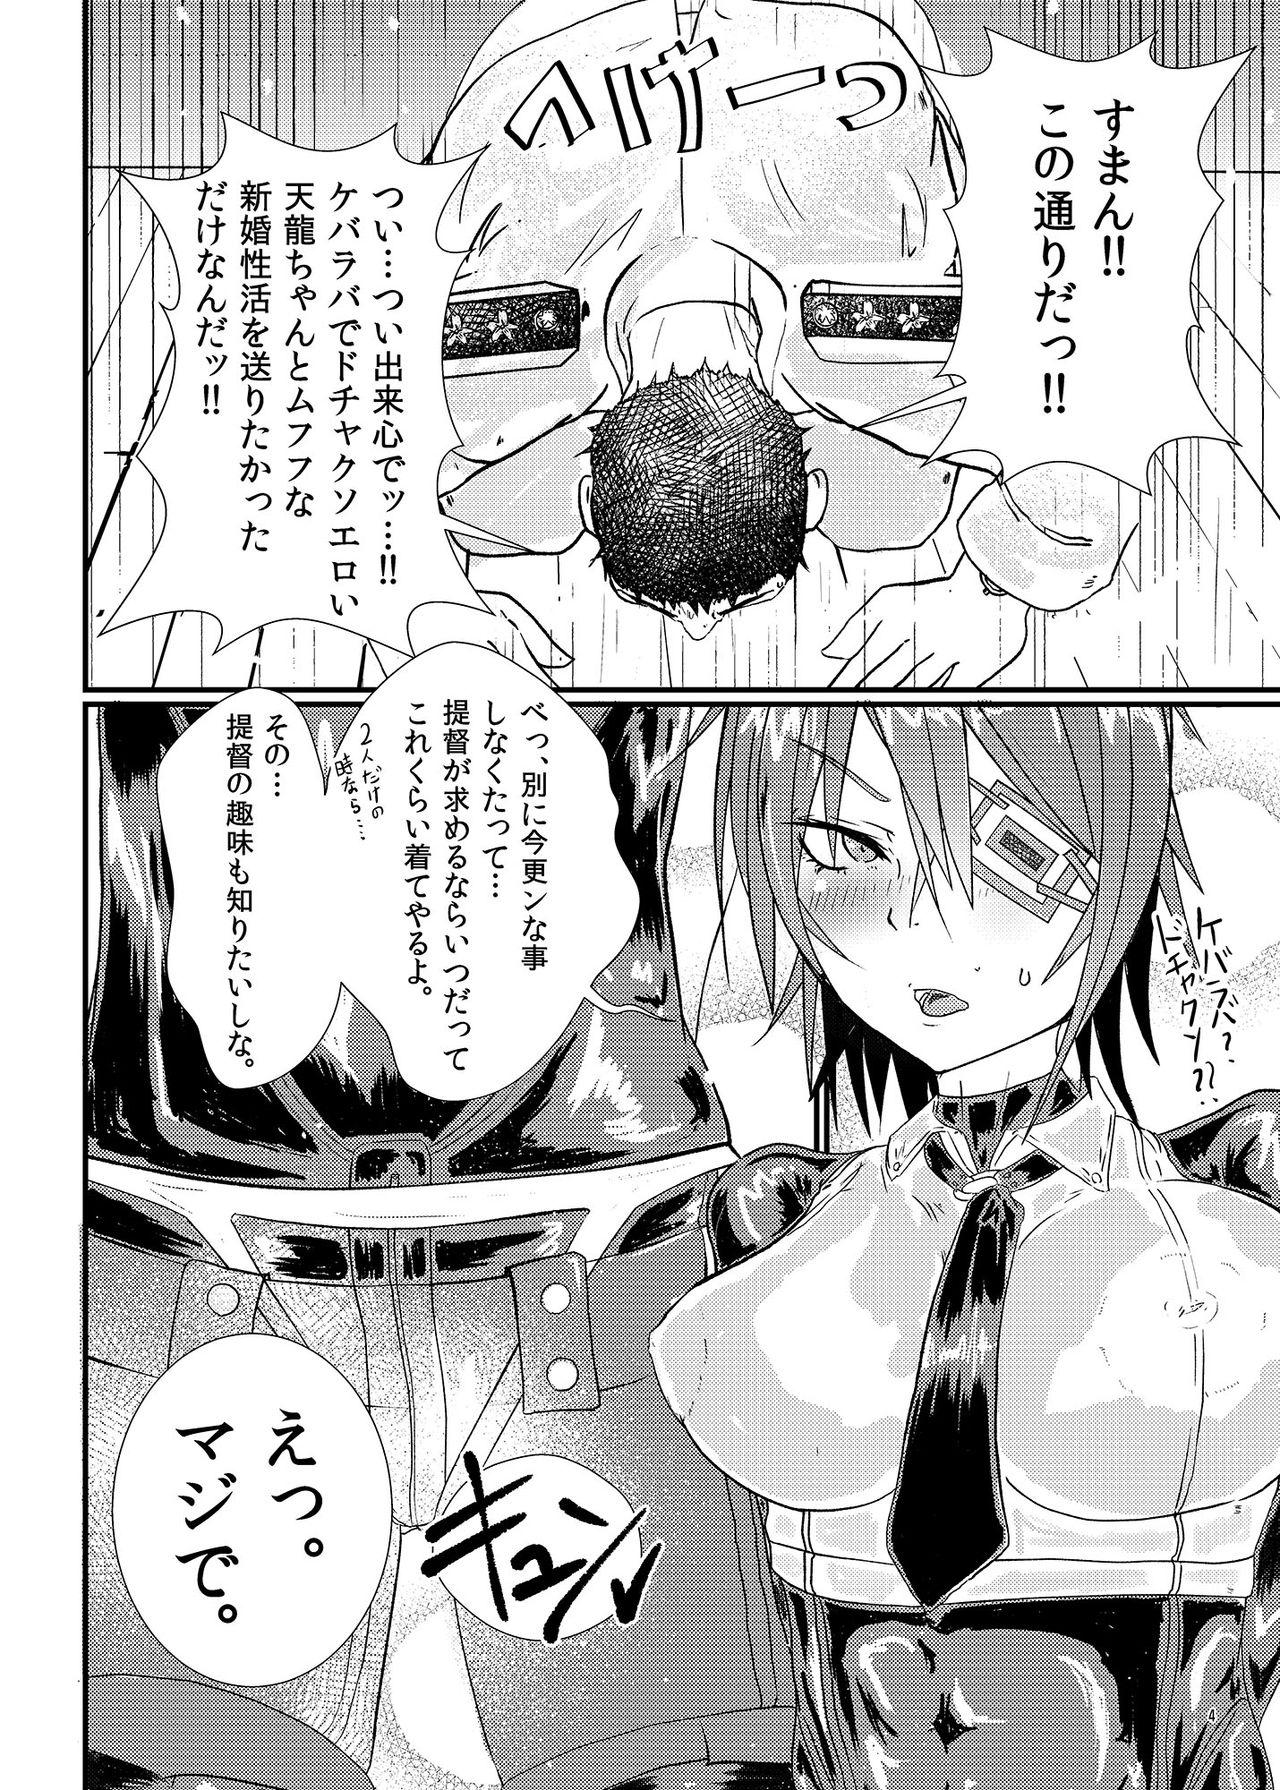 Sapphic Erotica RUB BITE - Kantai collection Best Blowjobs - Page 3